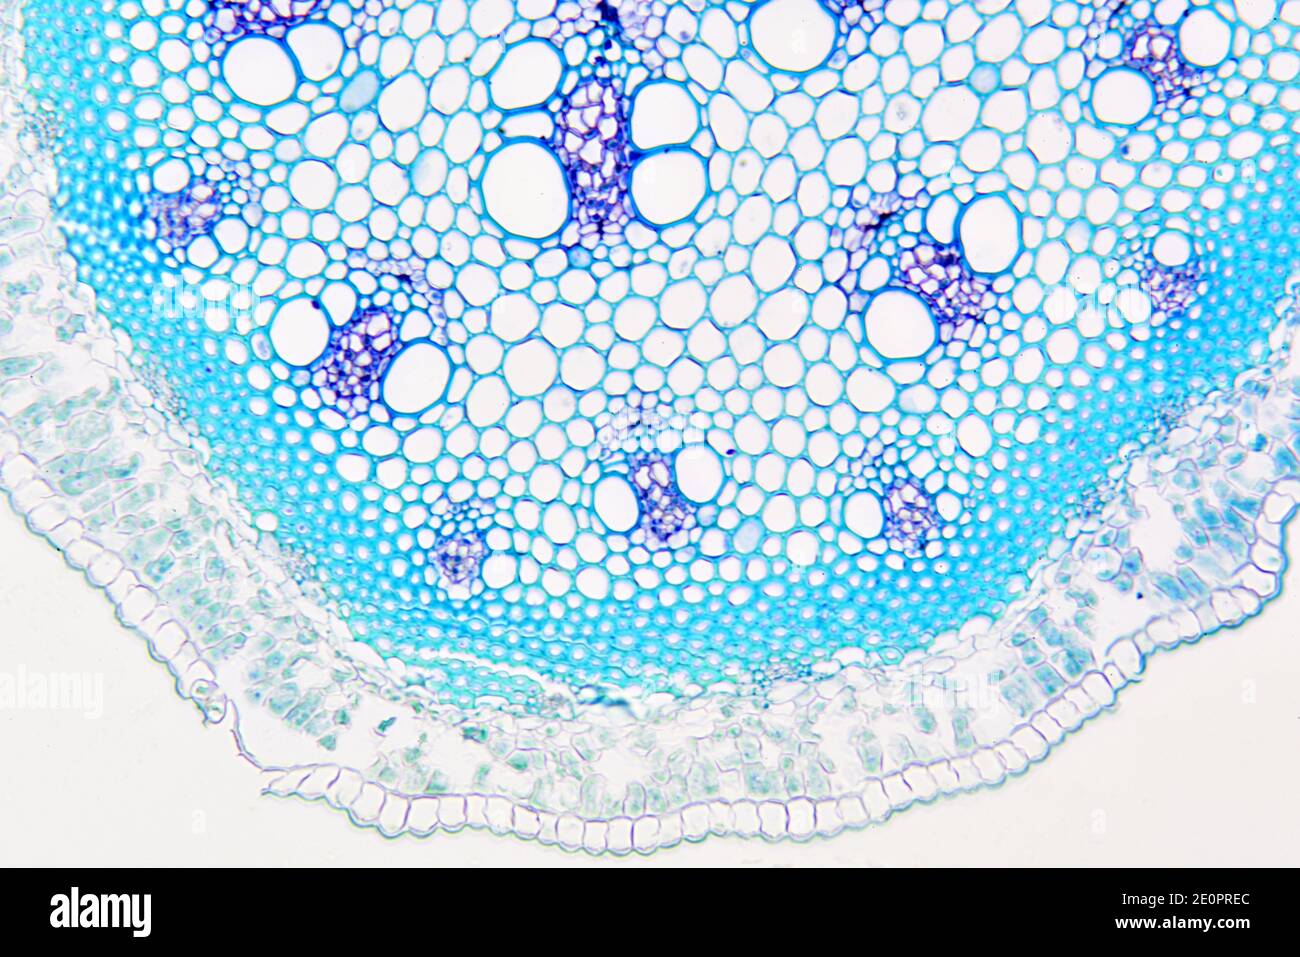 Stem of asparagus (Asparagus officinalis) showing from outside to inside: epidermis, cortex with palisade, endodermis, perycicle, vascular bundles Stock Photo